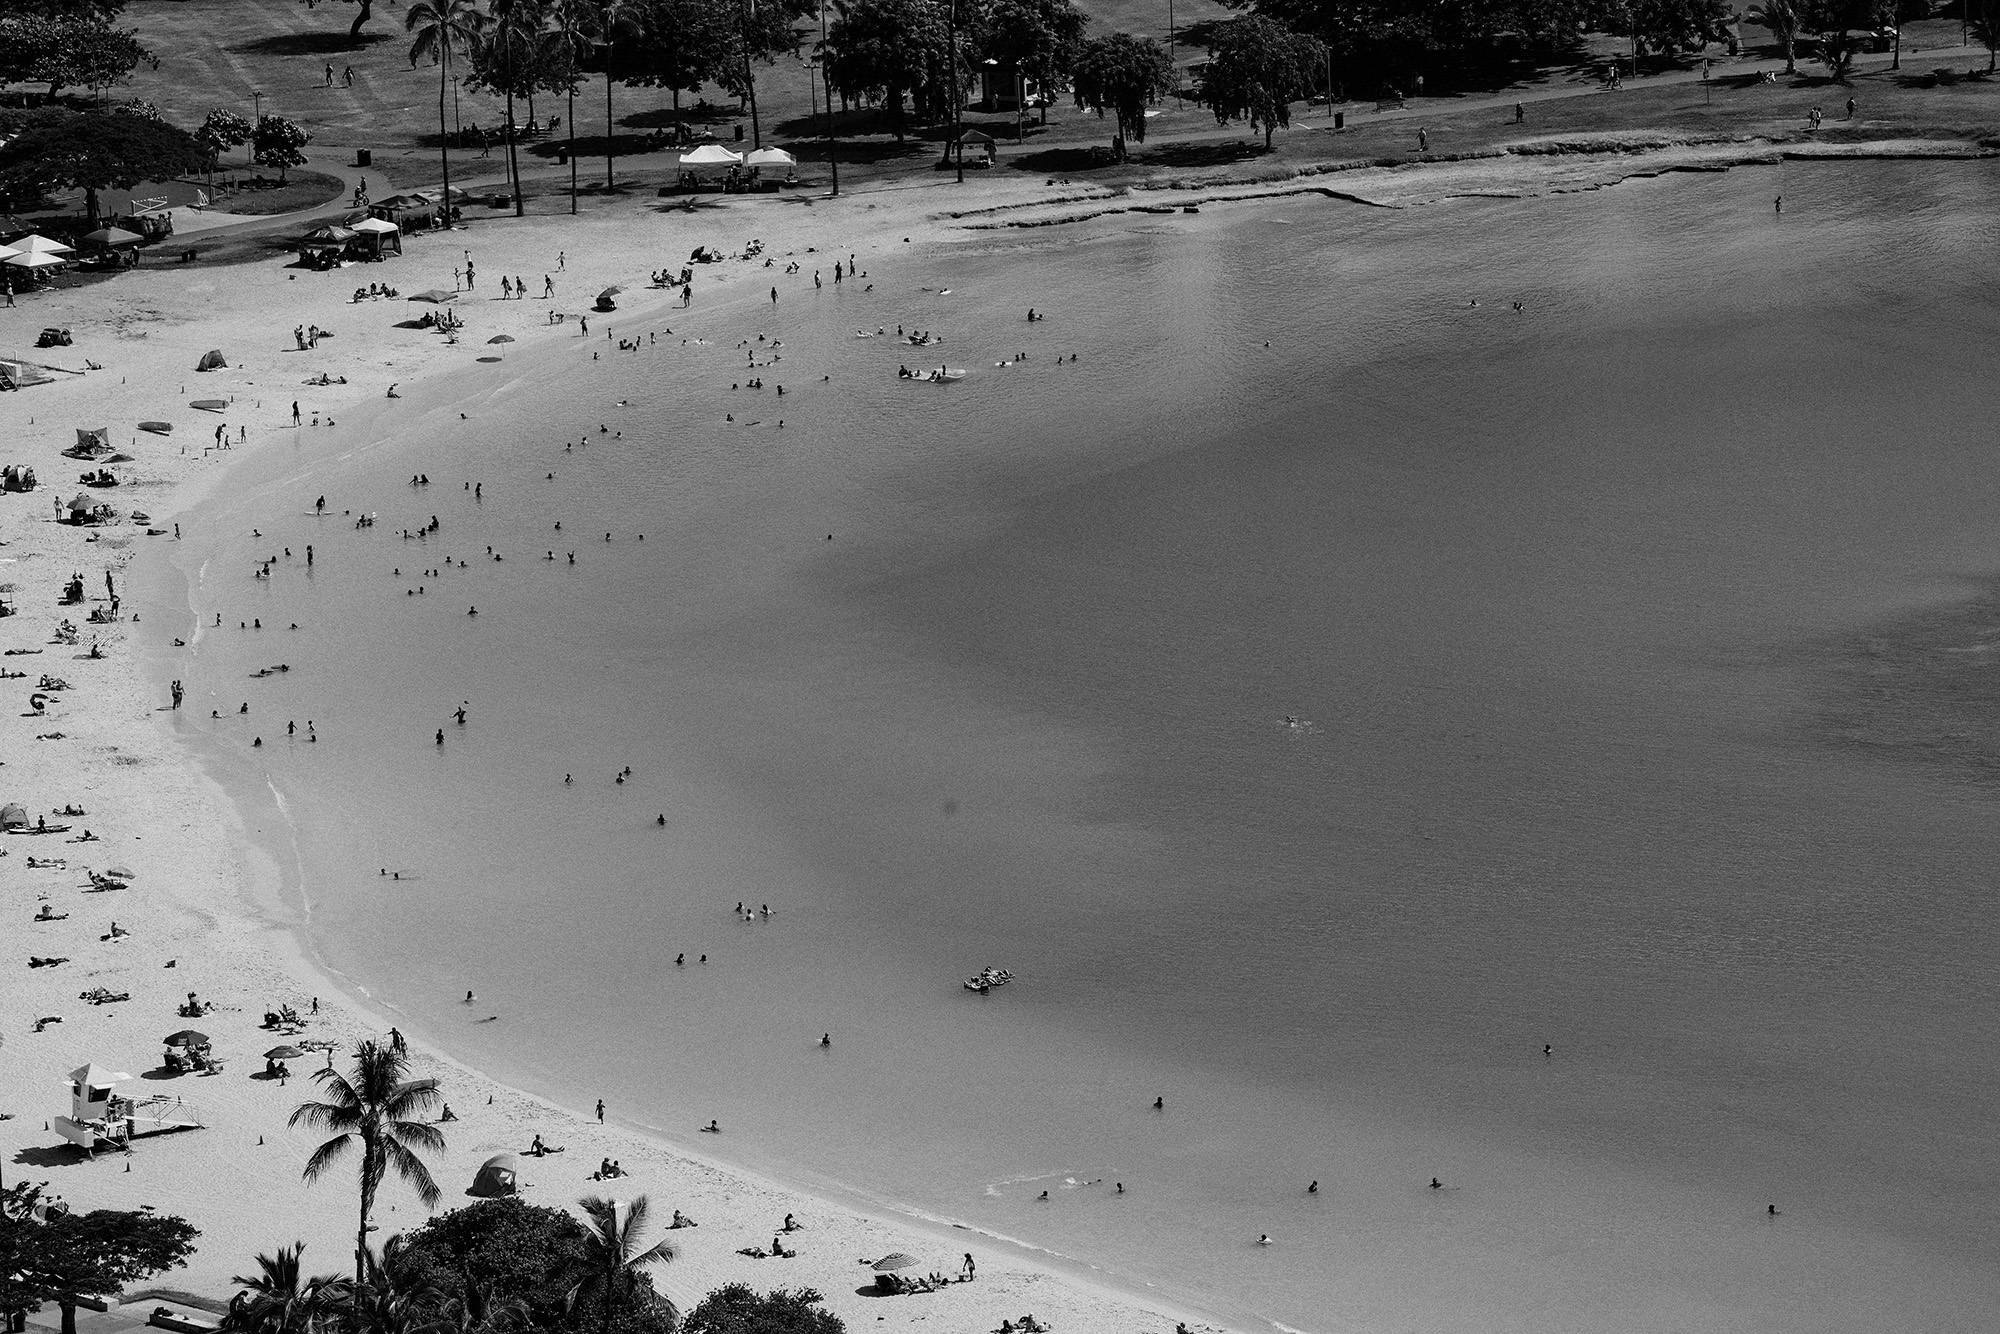 Aerial view of beachgoers at the shore